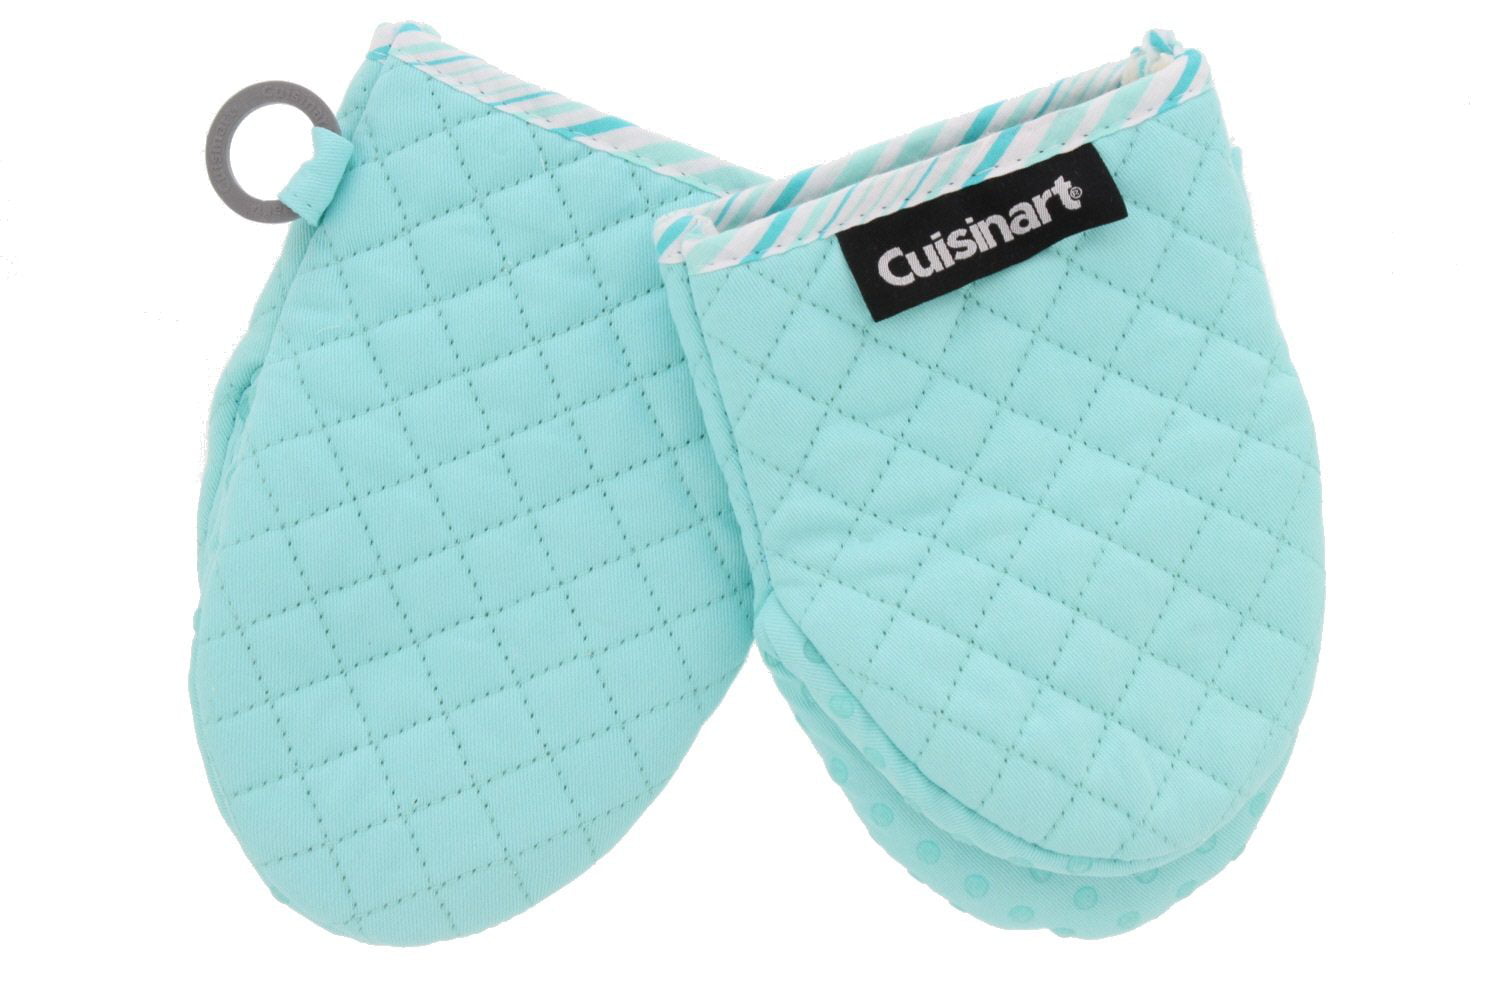 CUISINART Silicone Quilted Mini Oven Mitts GRAY  NEW 